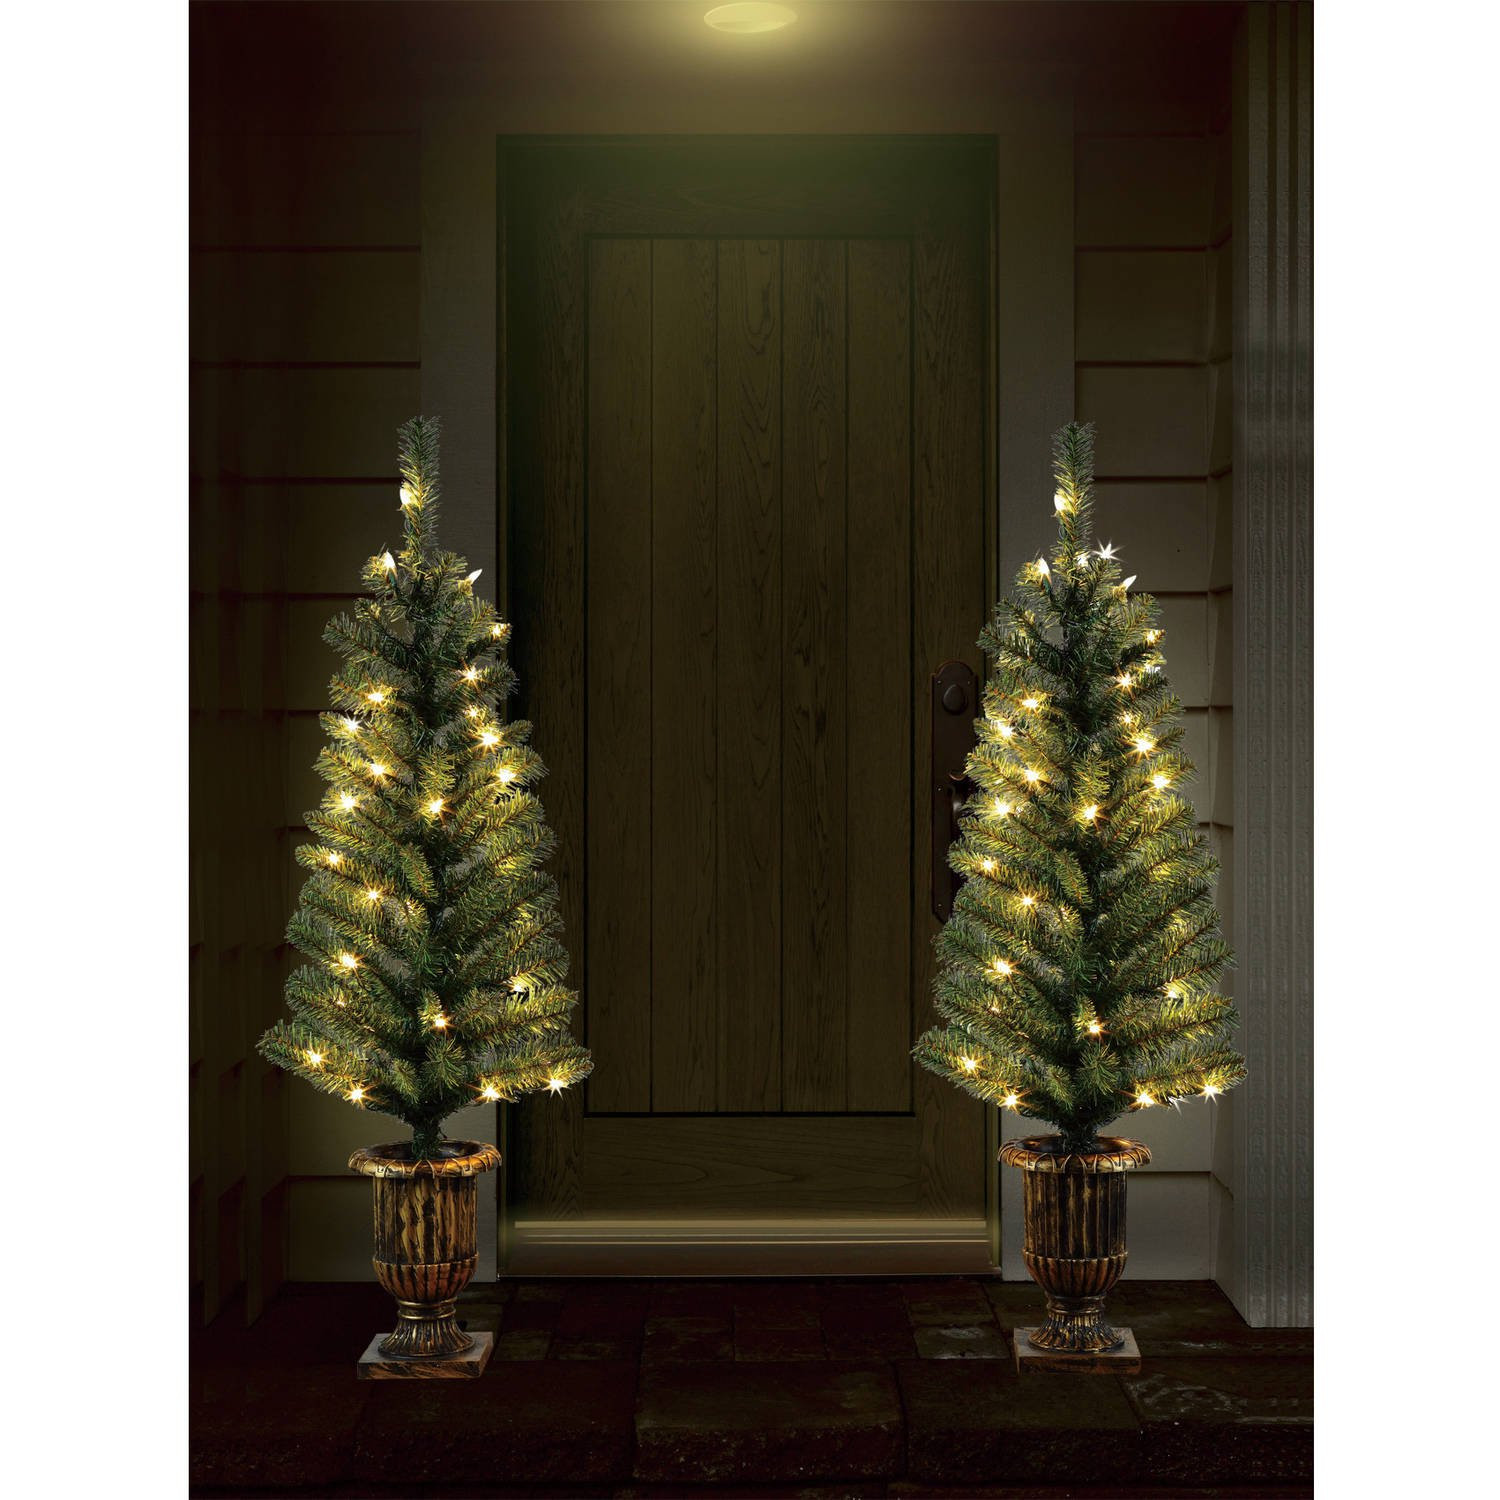 Prelit Porch Christmas Trees
 4 Pre Lit Northern Dunhill Fir Full Artificial Christmas